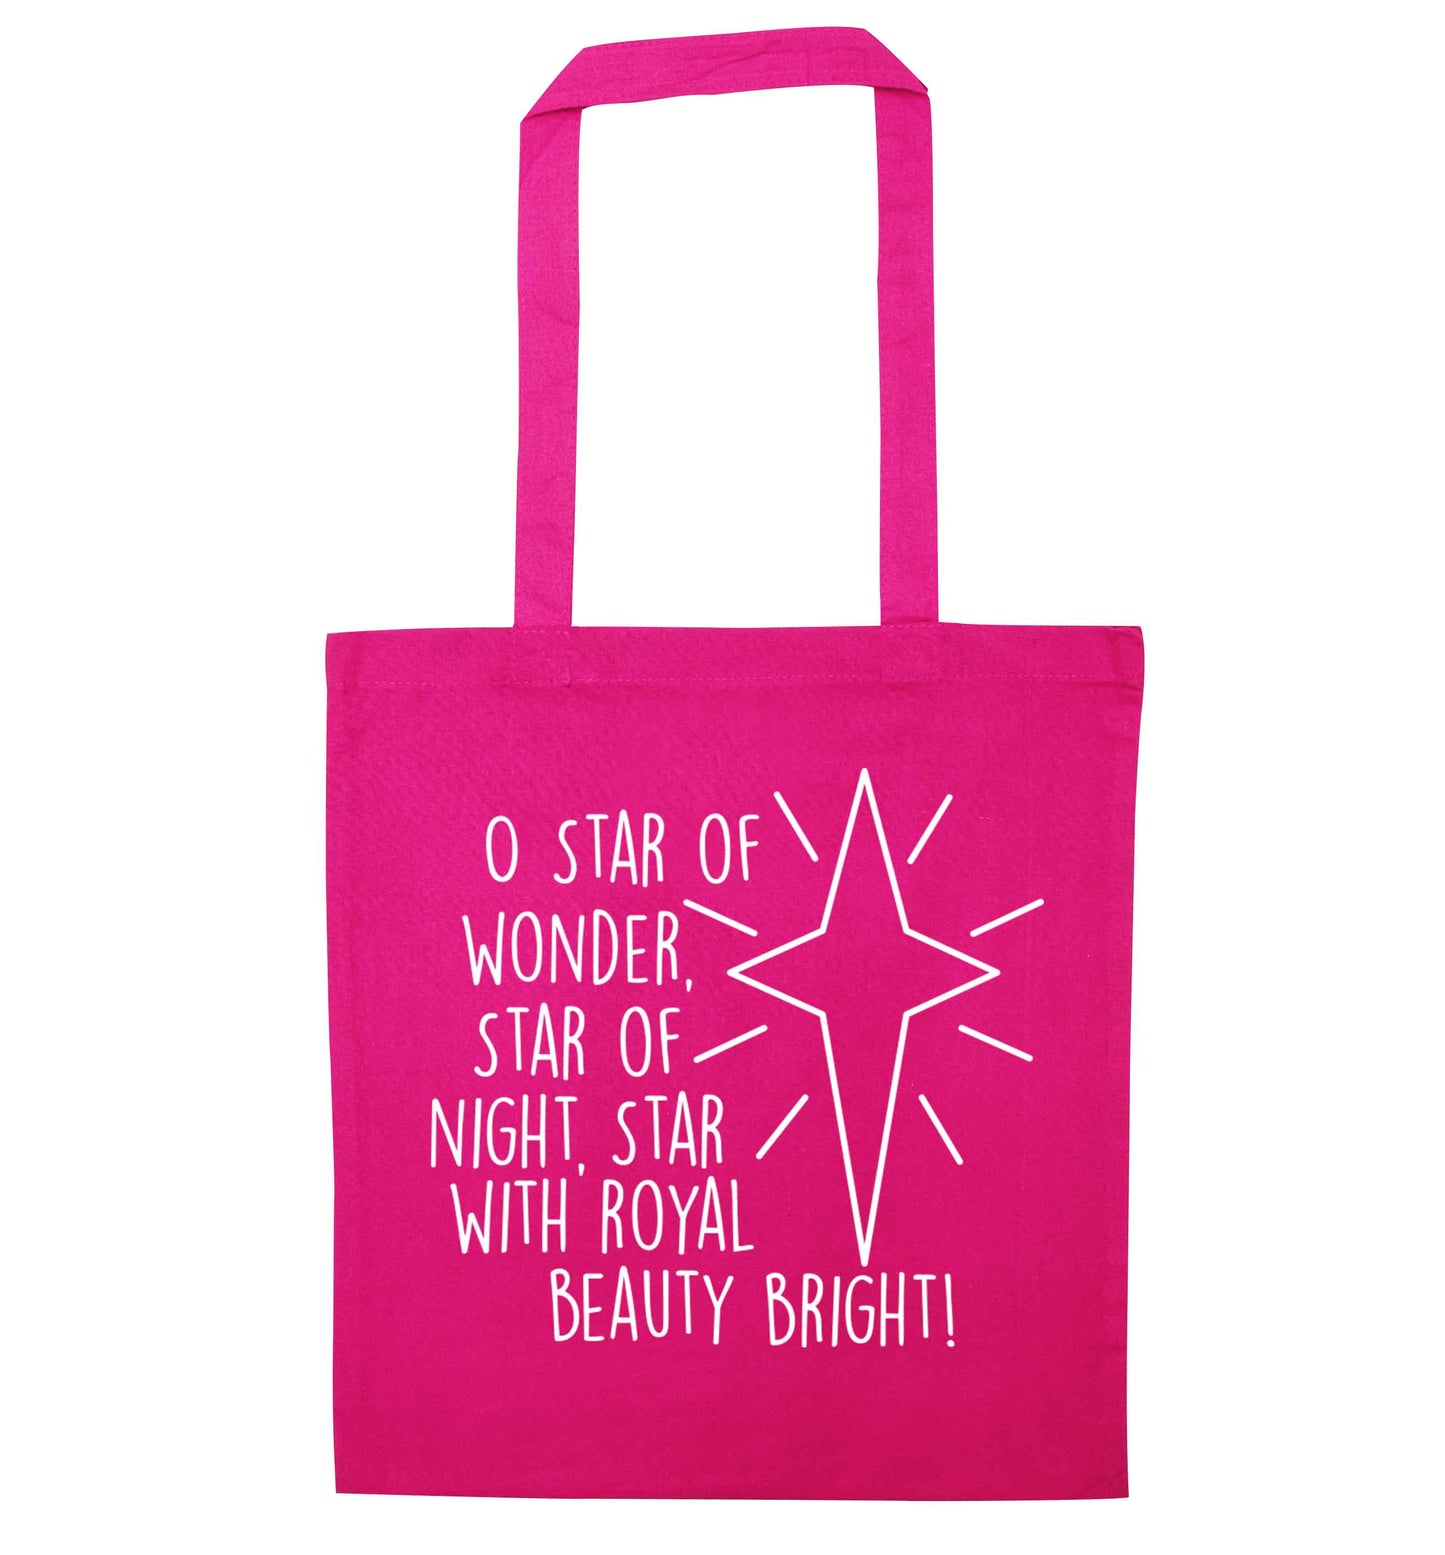 Oh star of wonder star of night, star with royal beauty bright pink tote bag